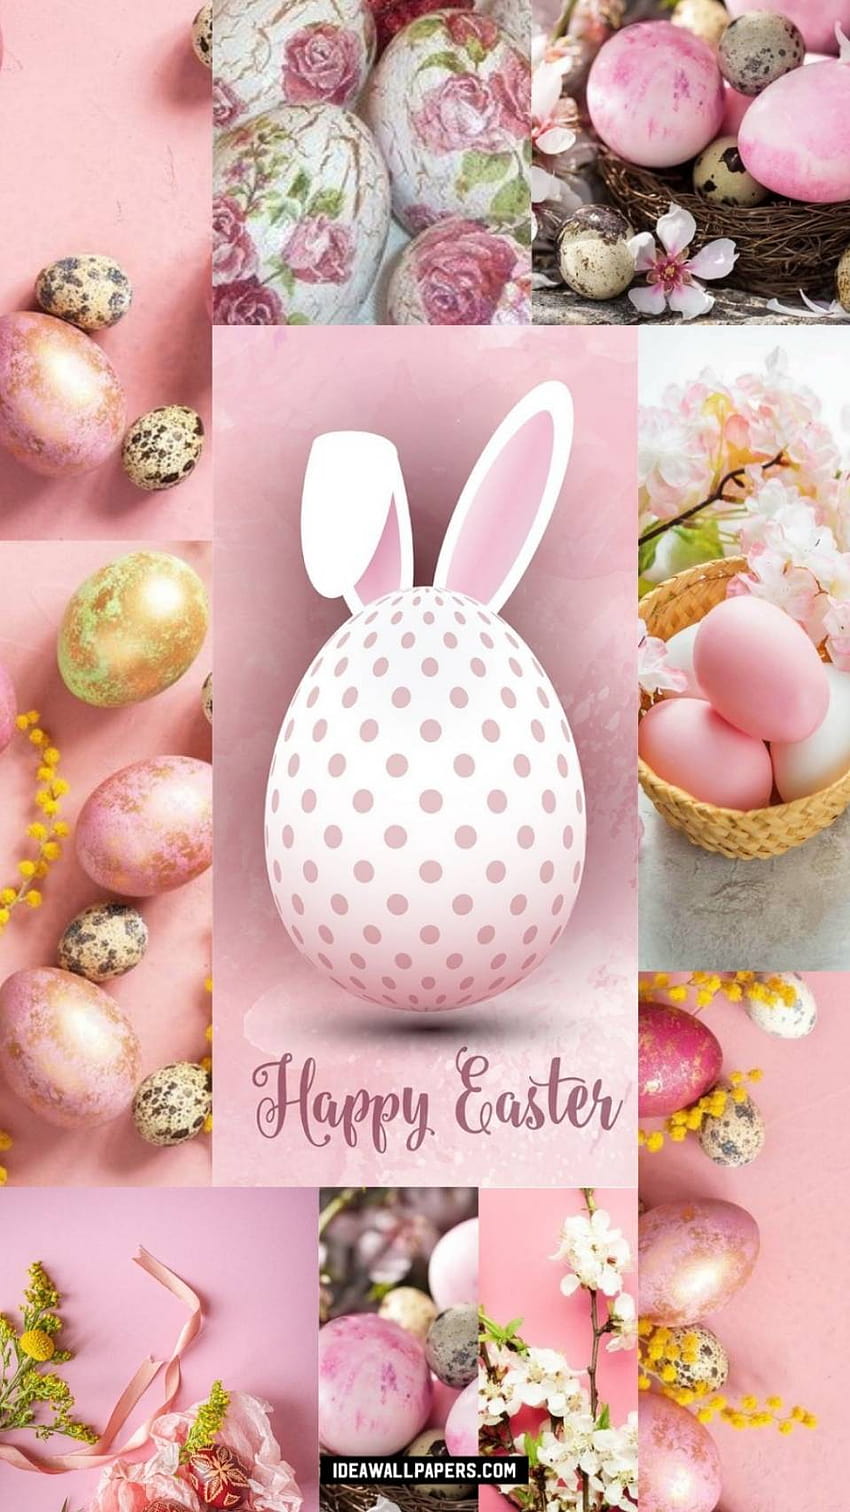 Pin by 𝓥𝓮𝓻𝓸𝓷𝓲𝓬𝓪 on ωαℓℓραρεя  Pink easter wallpaper Bunny  wallpaper Easter wallpaper